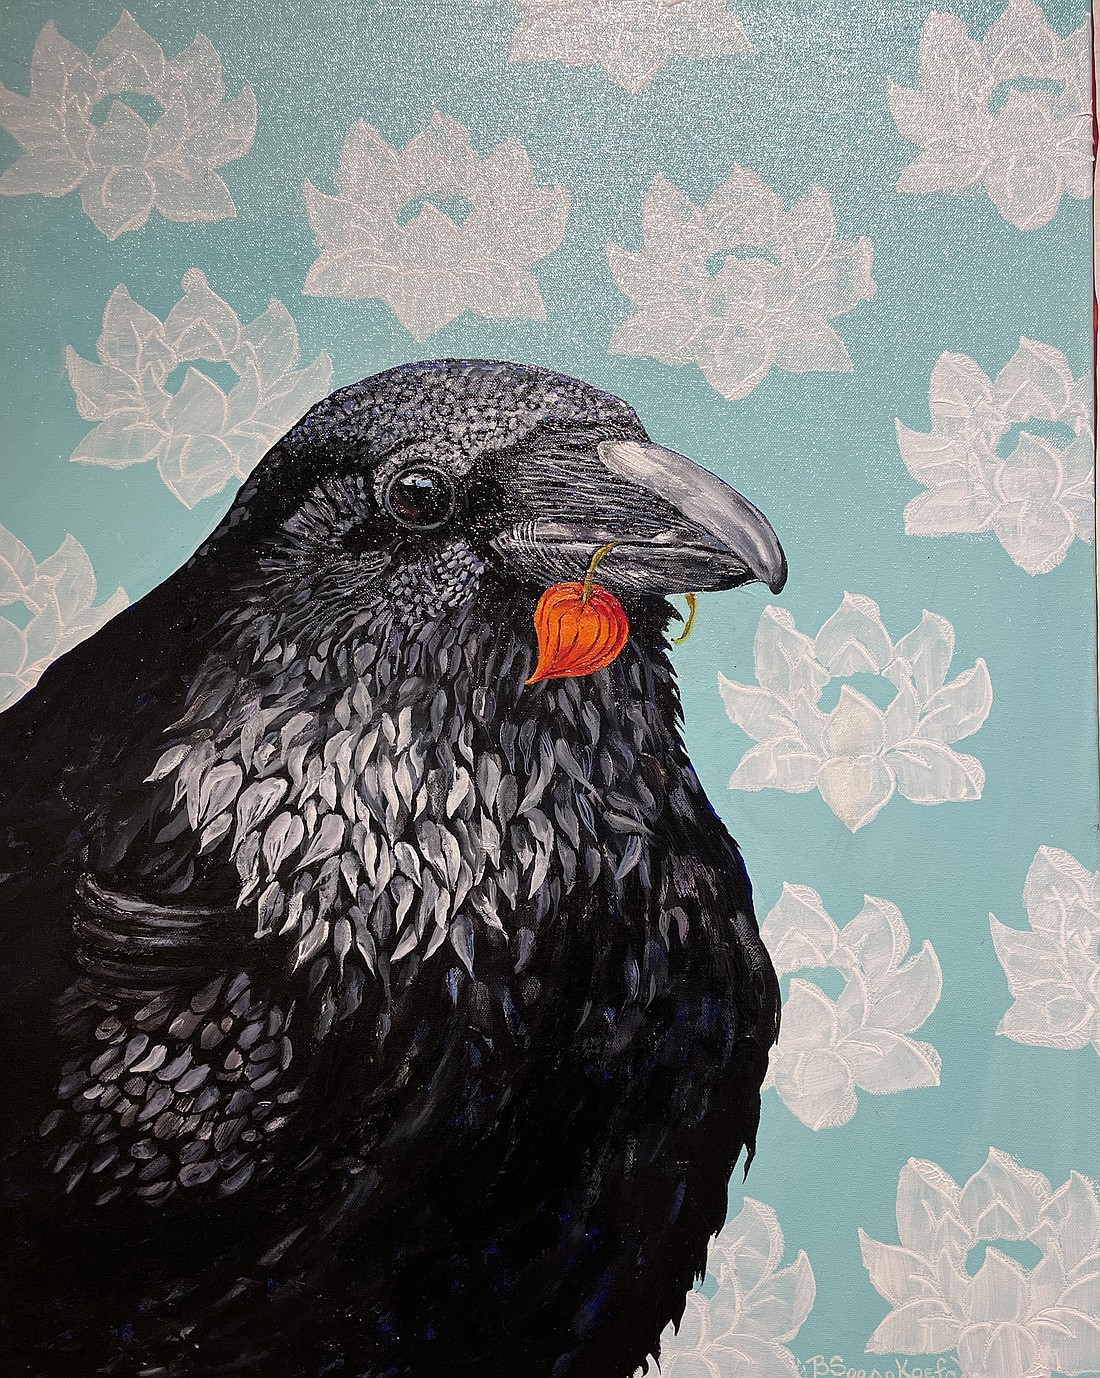 Barbara Seese’s oil painting on canvas, “He Delivered Love in a Cage,” idealizes a crow holding a red blossom in its mouth. The painting is part of the invitational bird exhibit “FL#CK,” showing through February at Smith & Vallee Gallery in Edison.